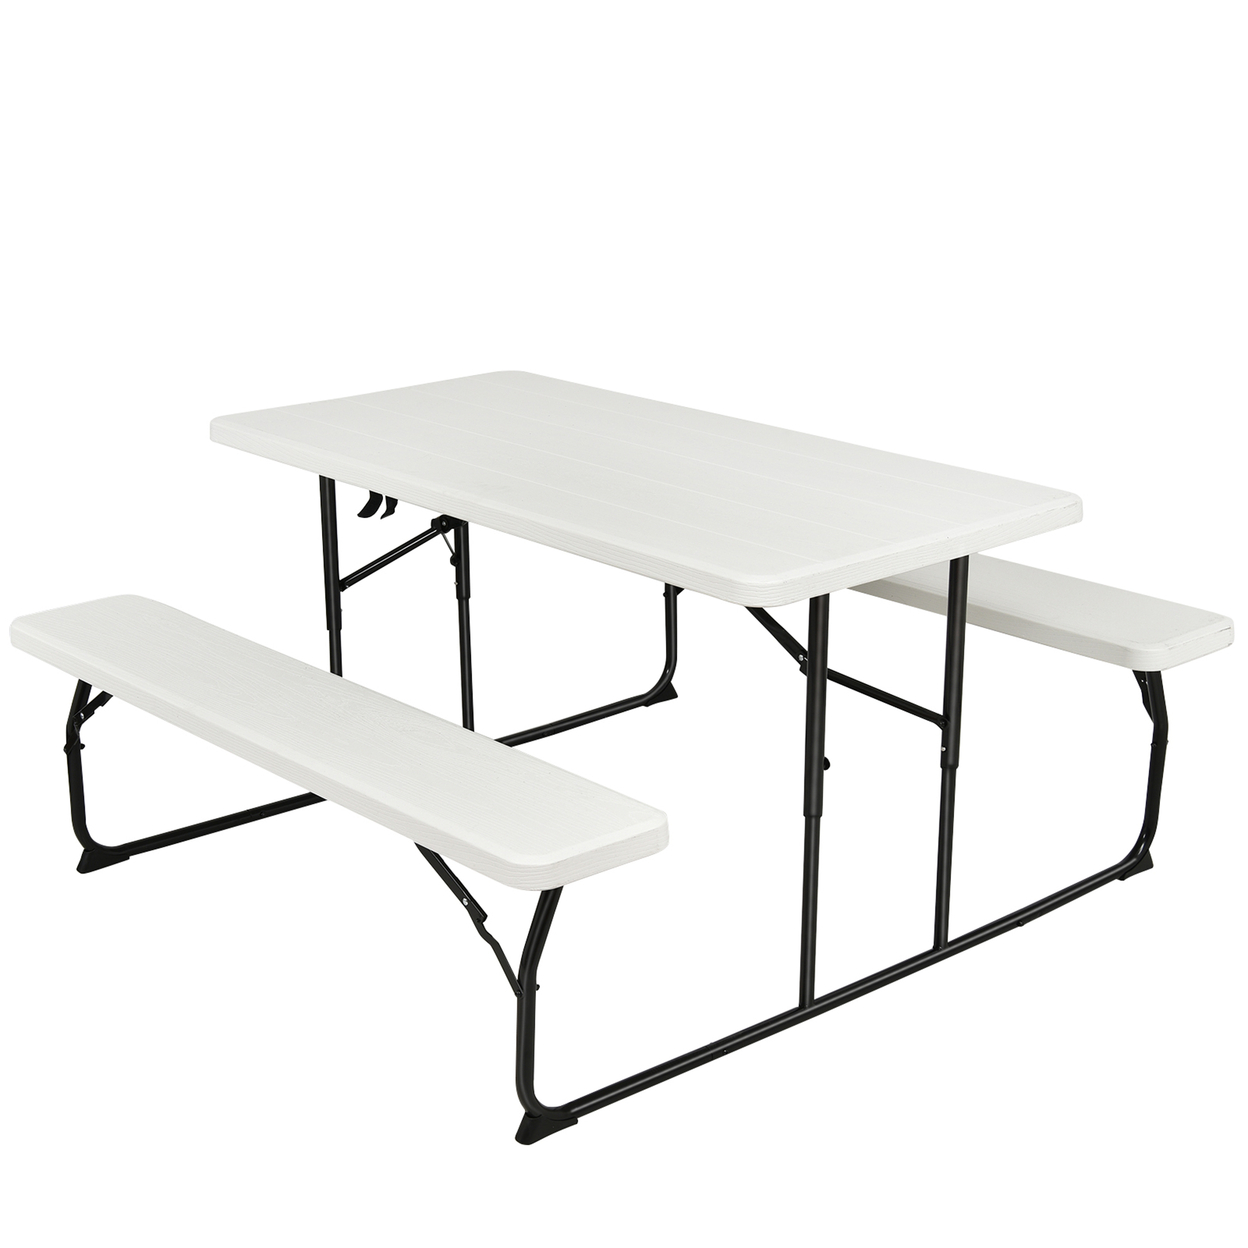 Folding Picnic Table & Bench Set For Camping BBQ W/ Steel Frame - White